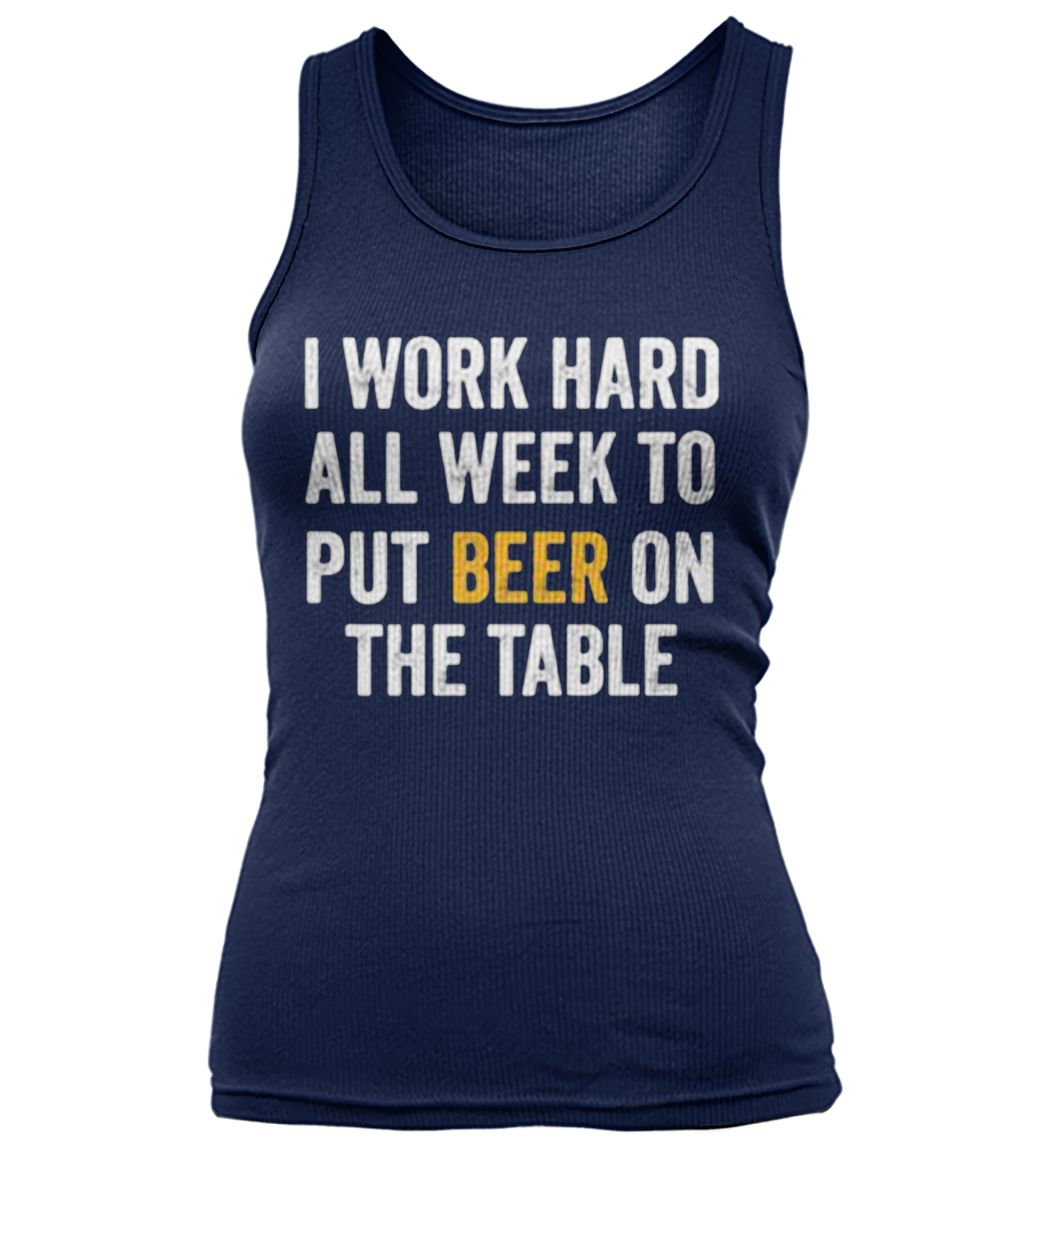 I work hard all week to put beer on the table women's tank top